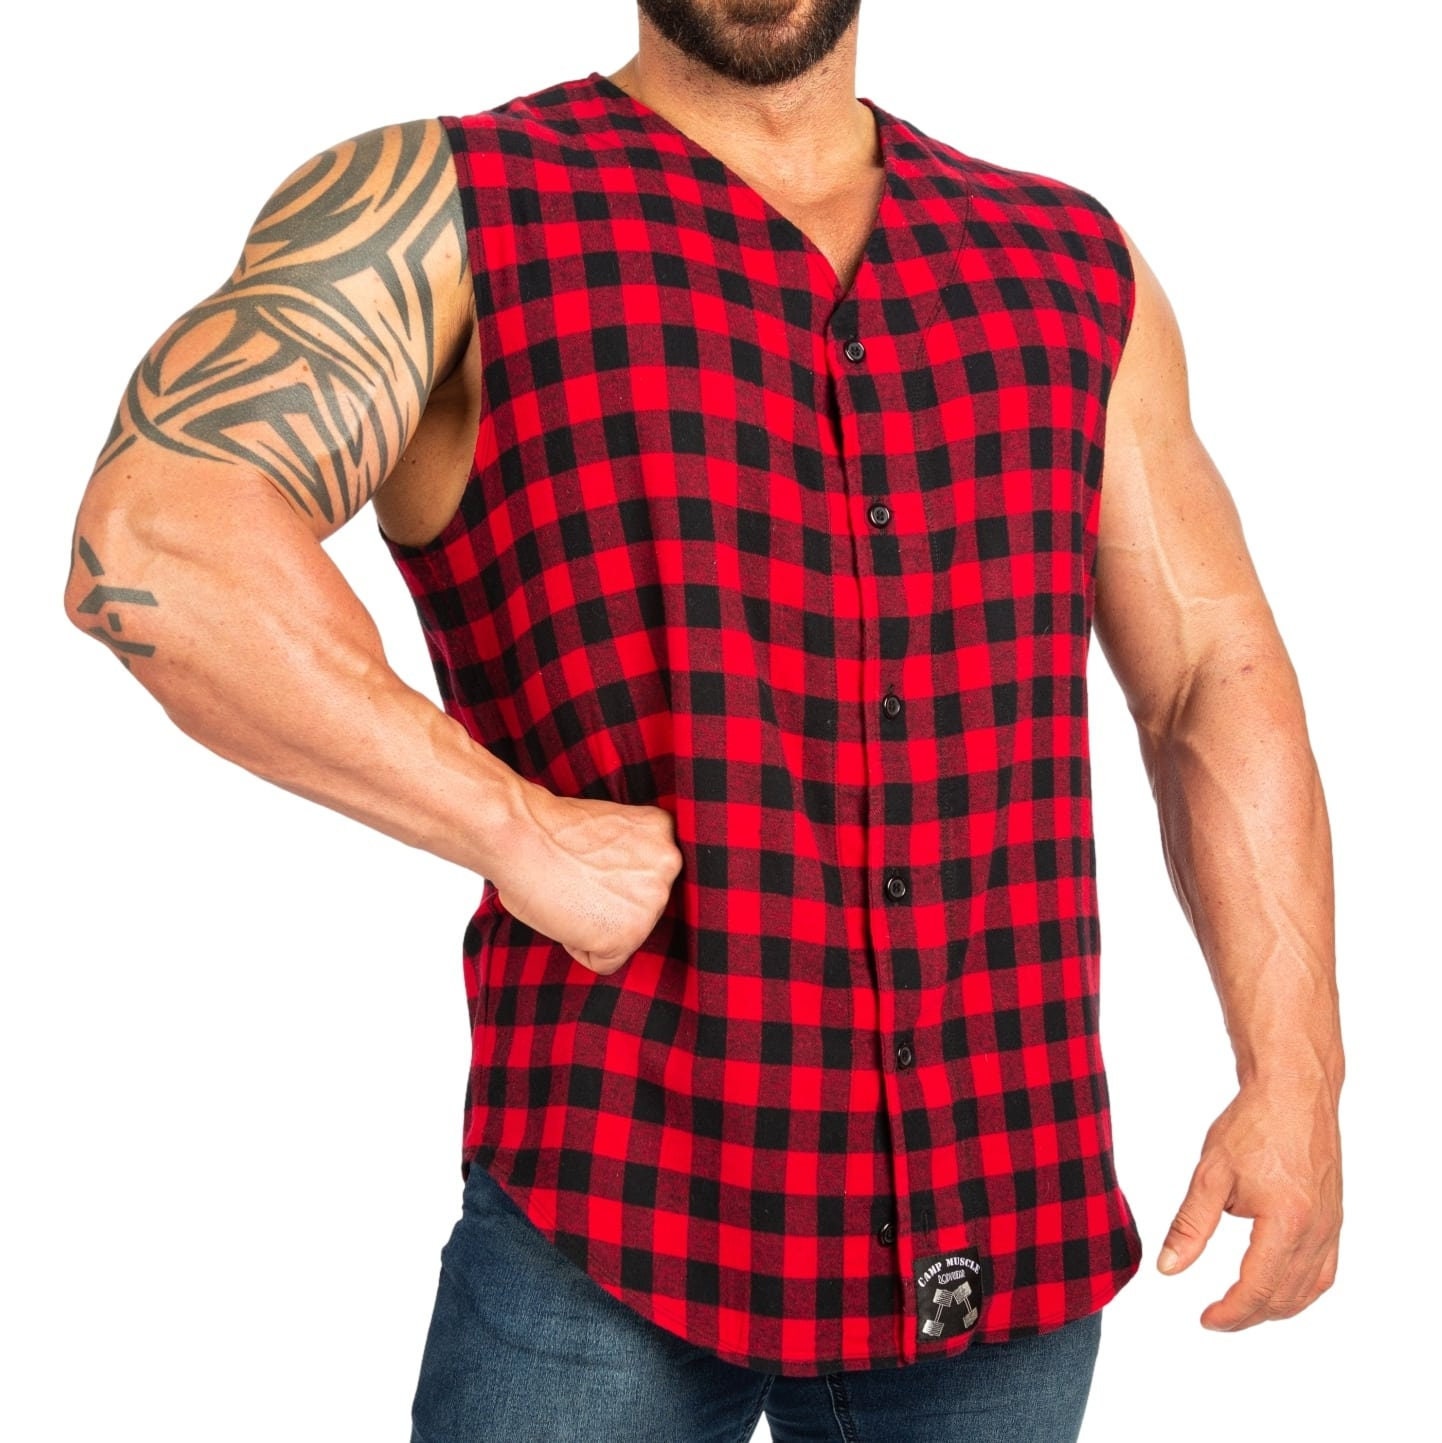 Mens Black Red Plaid Tapered Sleeveless Flannel Baseball Shirt Bodybuilding  Exercise Gym Fitness Workout Muscle Shirt -  Canada